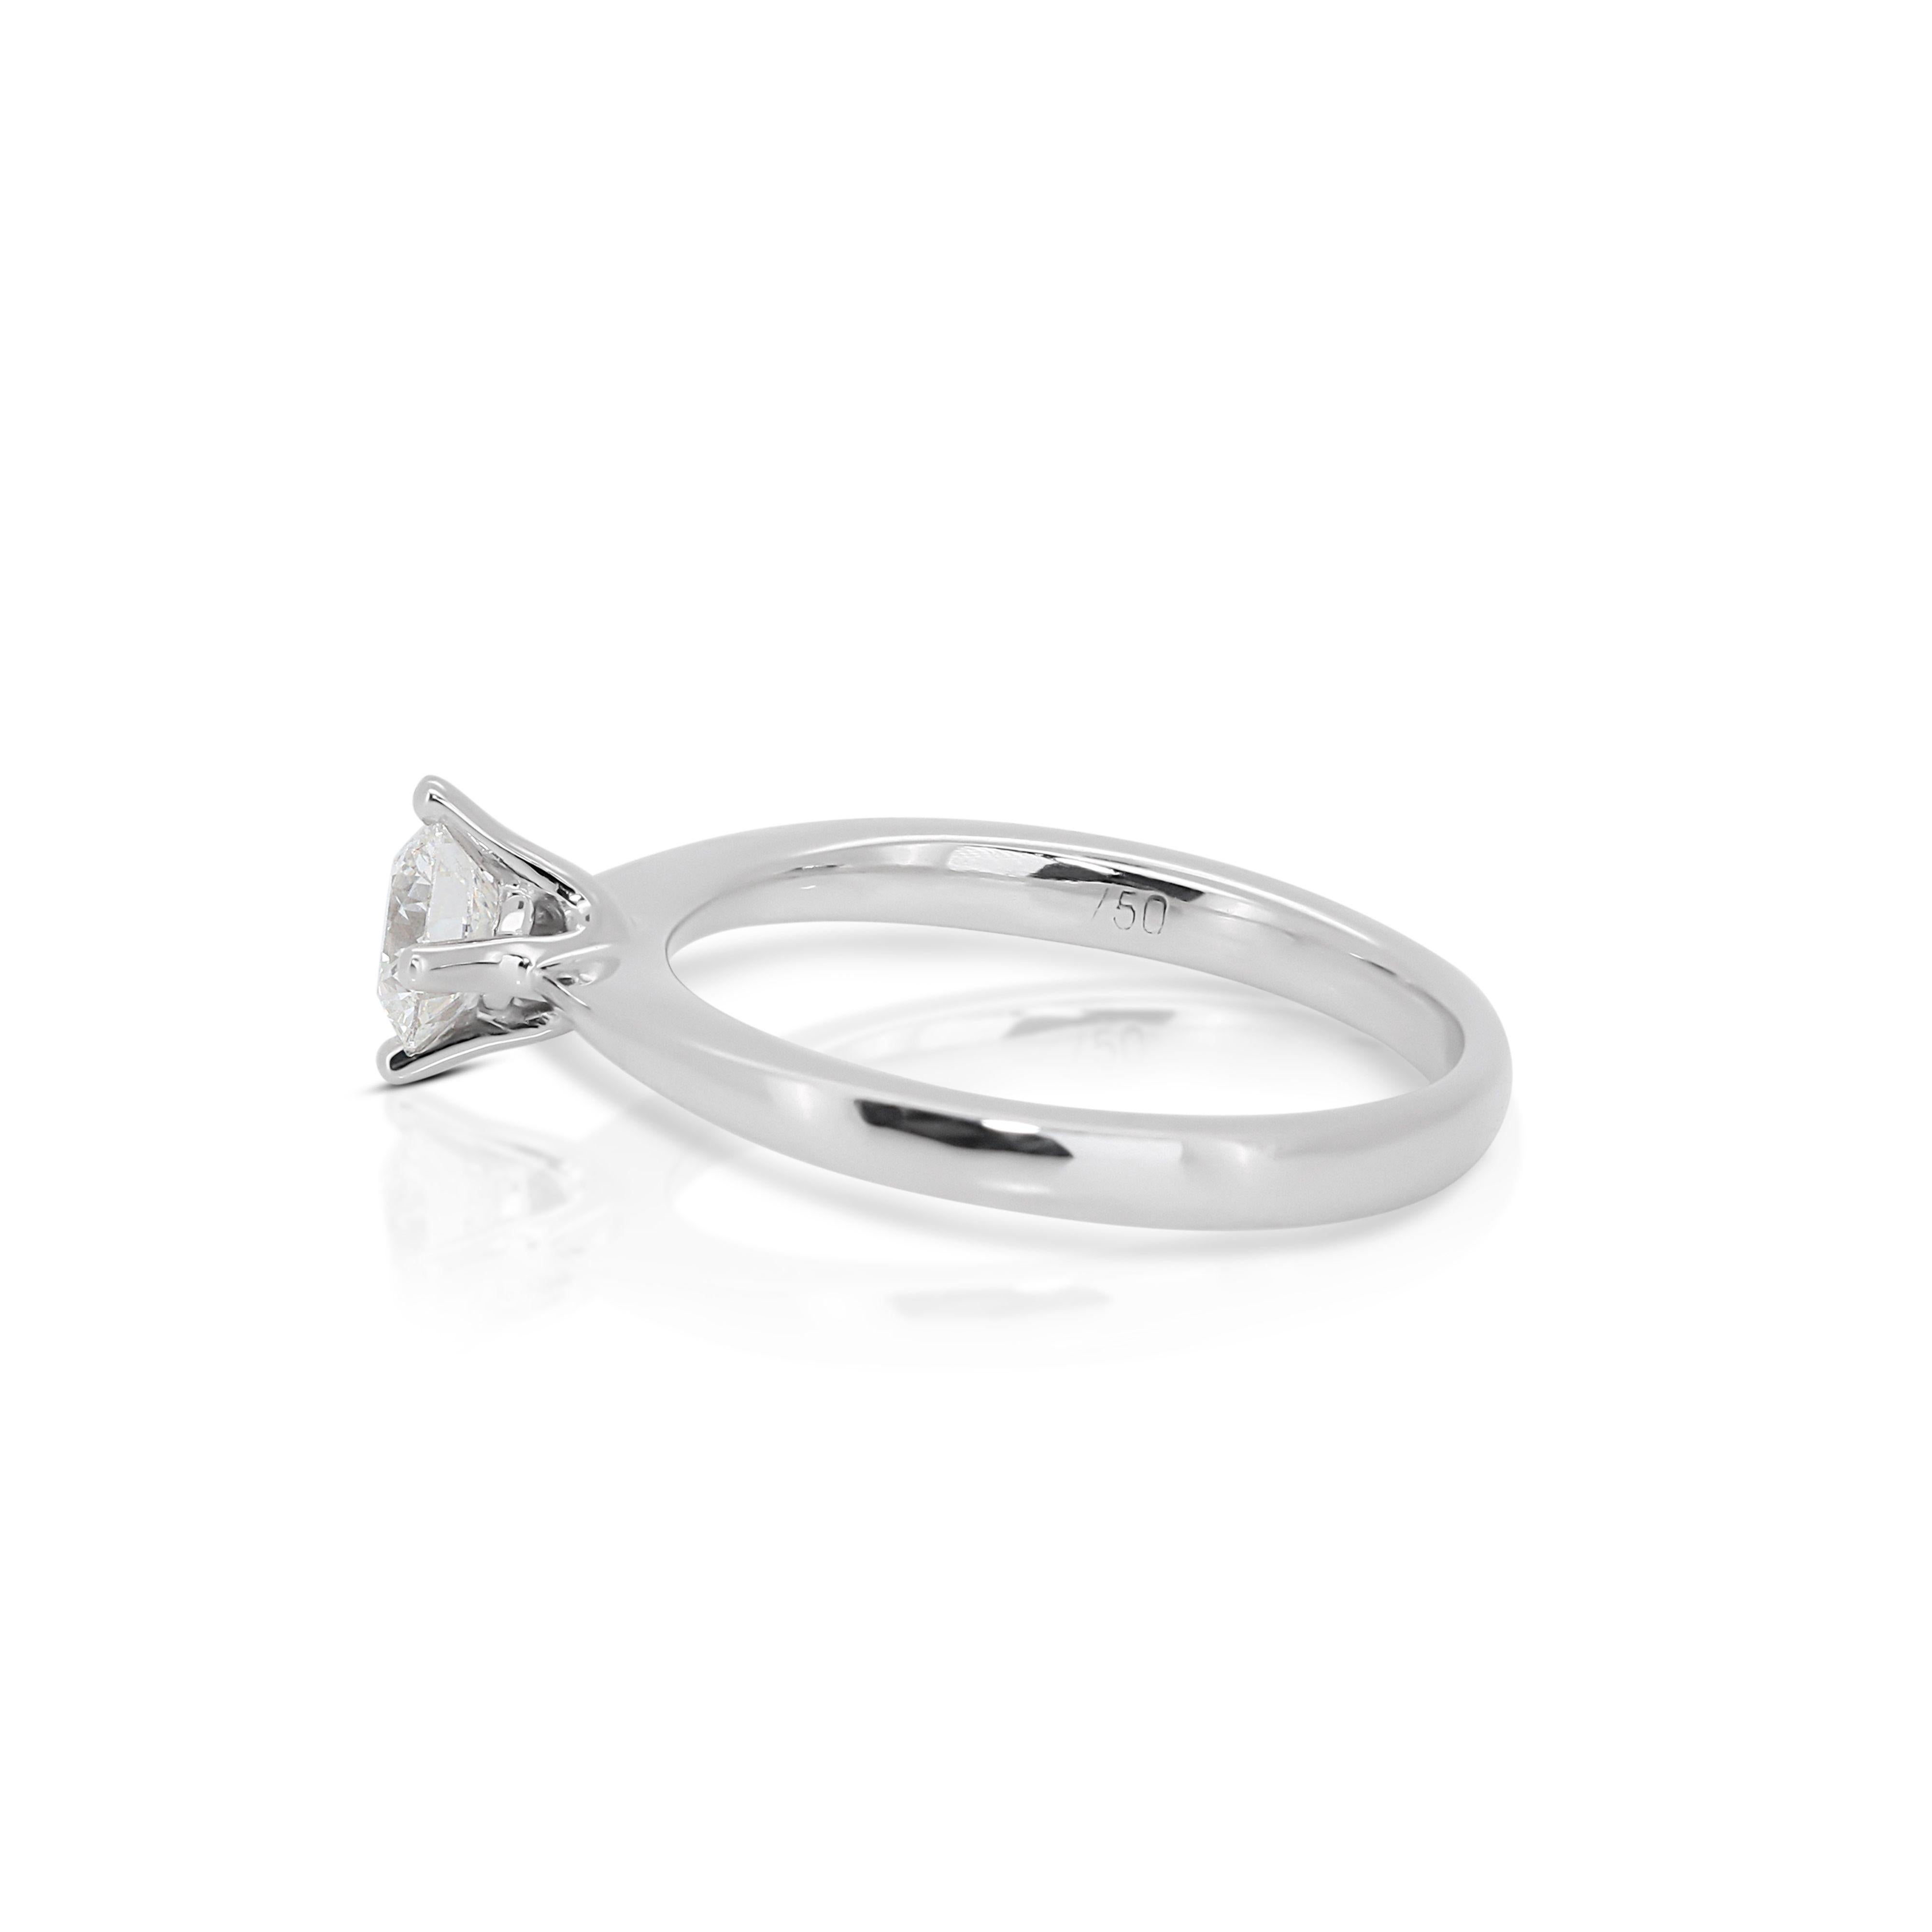 Beautiful 18K White Gold Solitaire Diamond Ring with 0.32ct Diamond For Sale 1